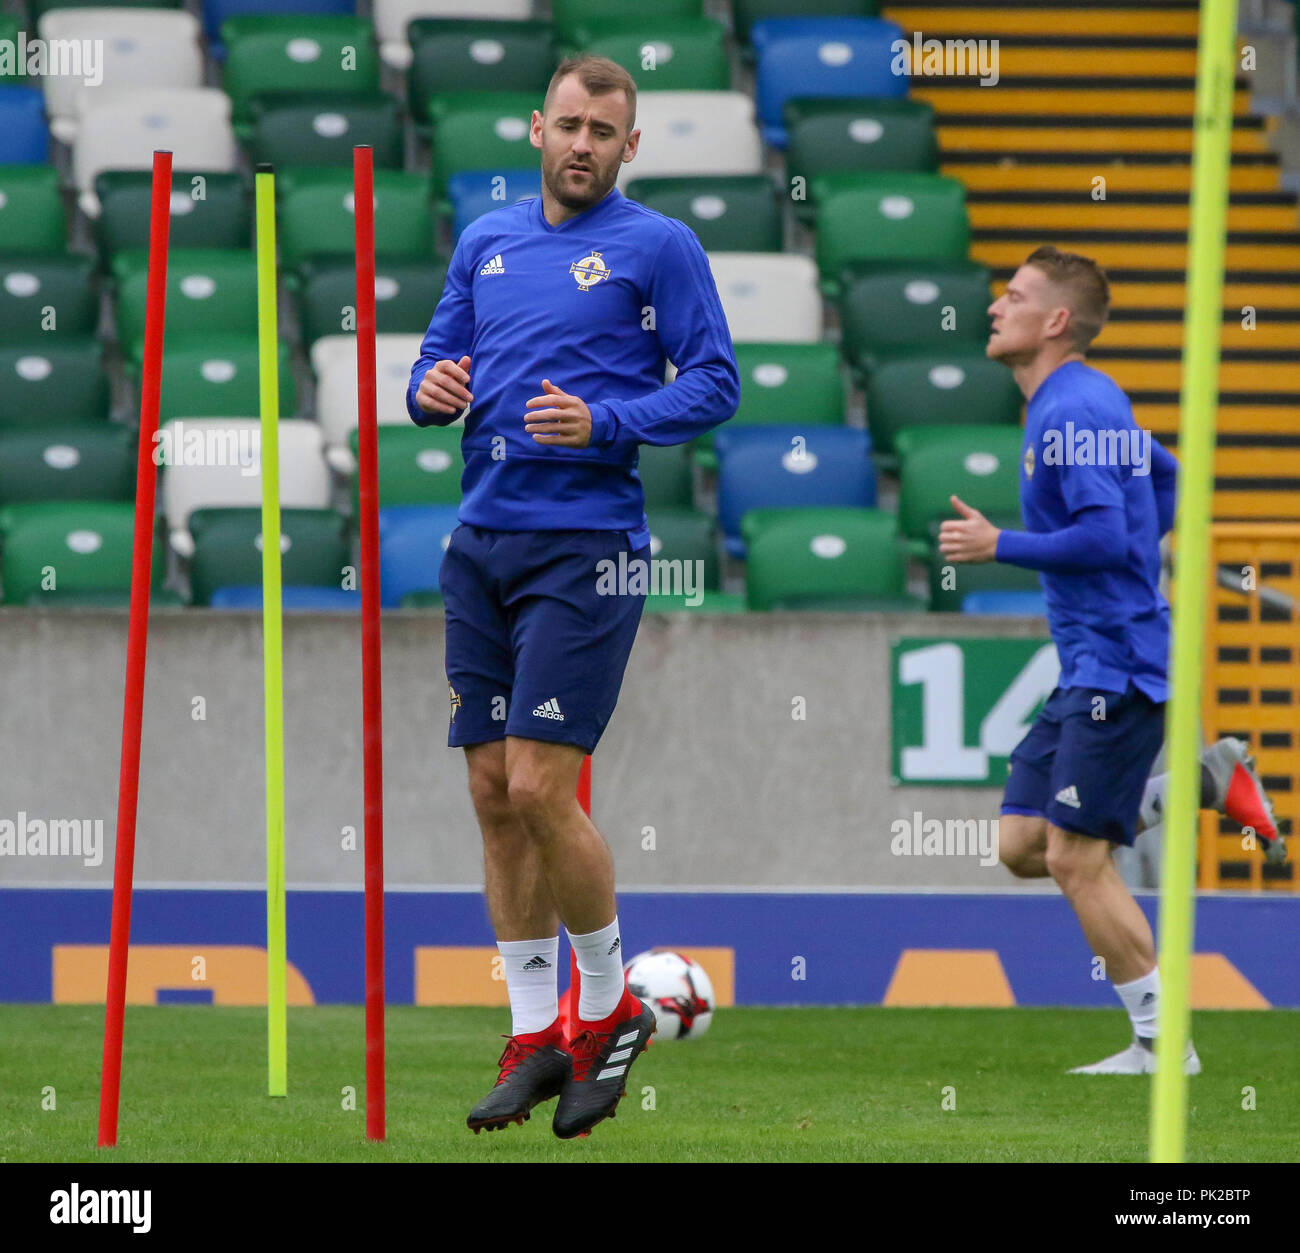 Windsor Park, Belfast, Northern Ireland. 10 September 2018. After Saturday's defeat in the UEFA Nations League, Northern Ireland returned to training this morning at Windsor Park. Tomorrow night they play Israel in a friendly international. Niall McGinn in training. Credit: David Hunter/Alamy Live News. Stock Photo